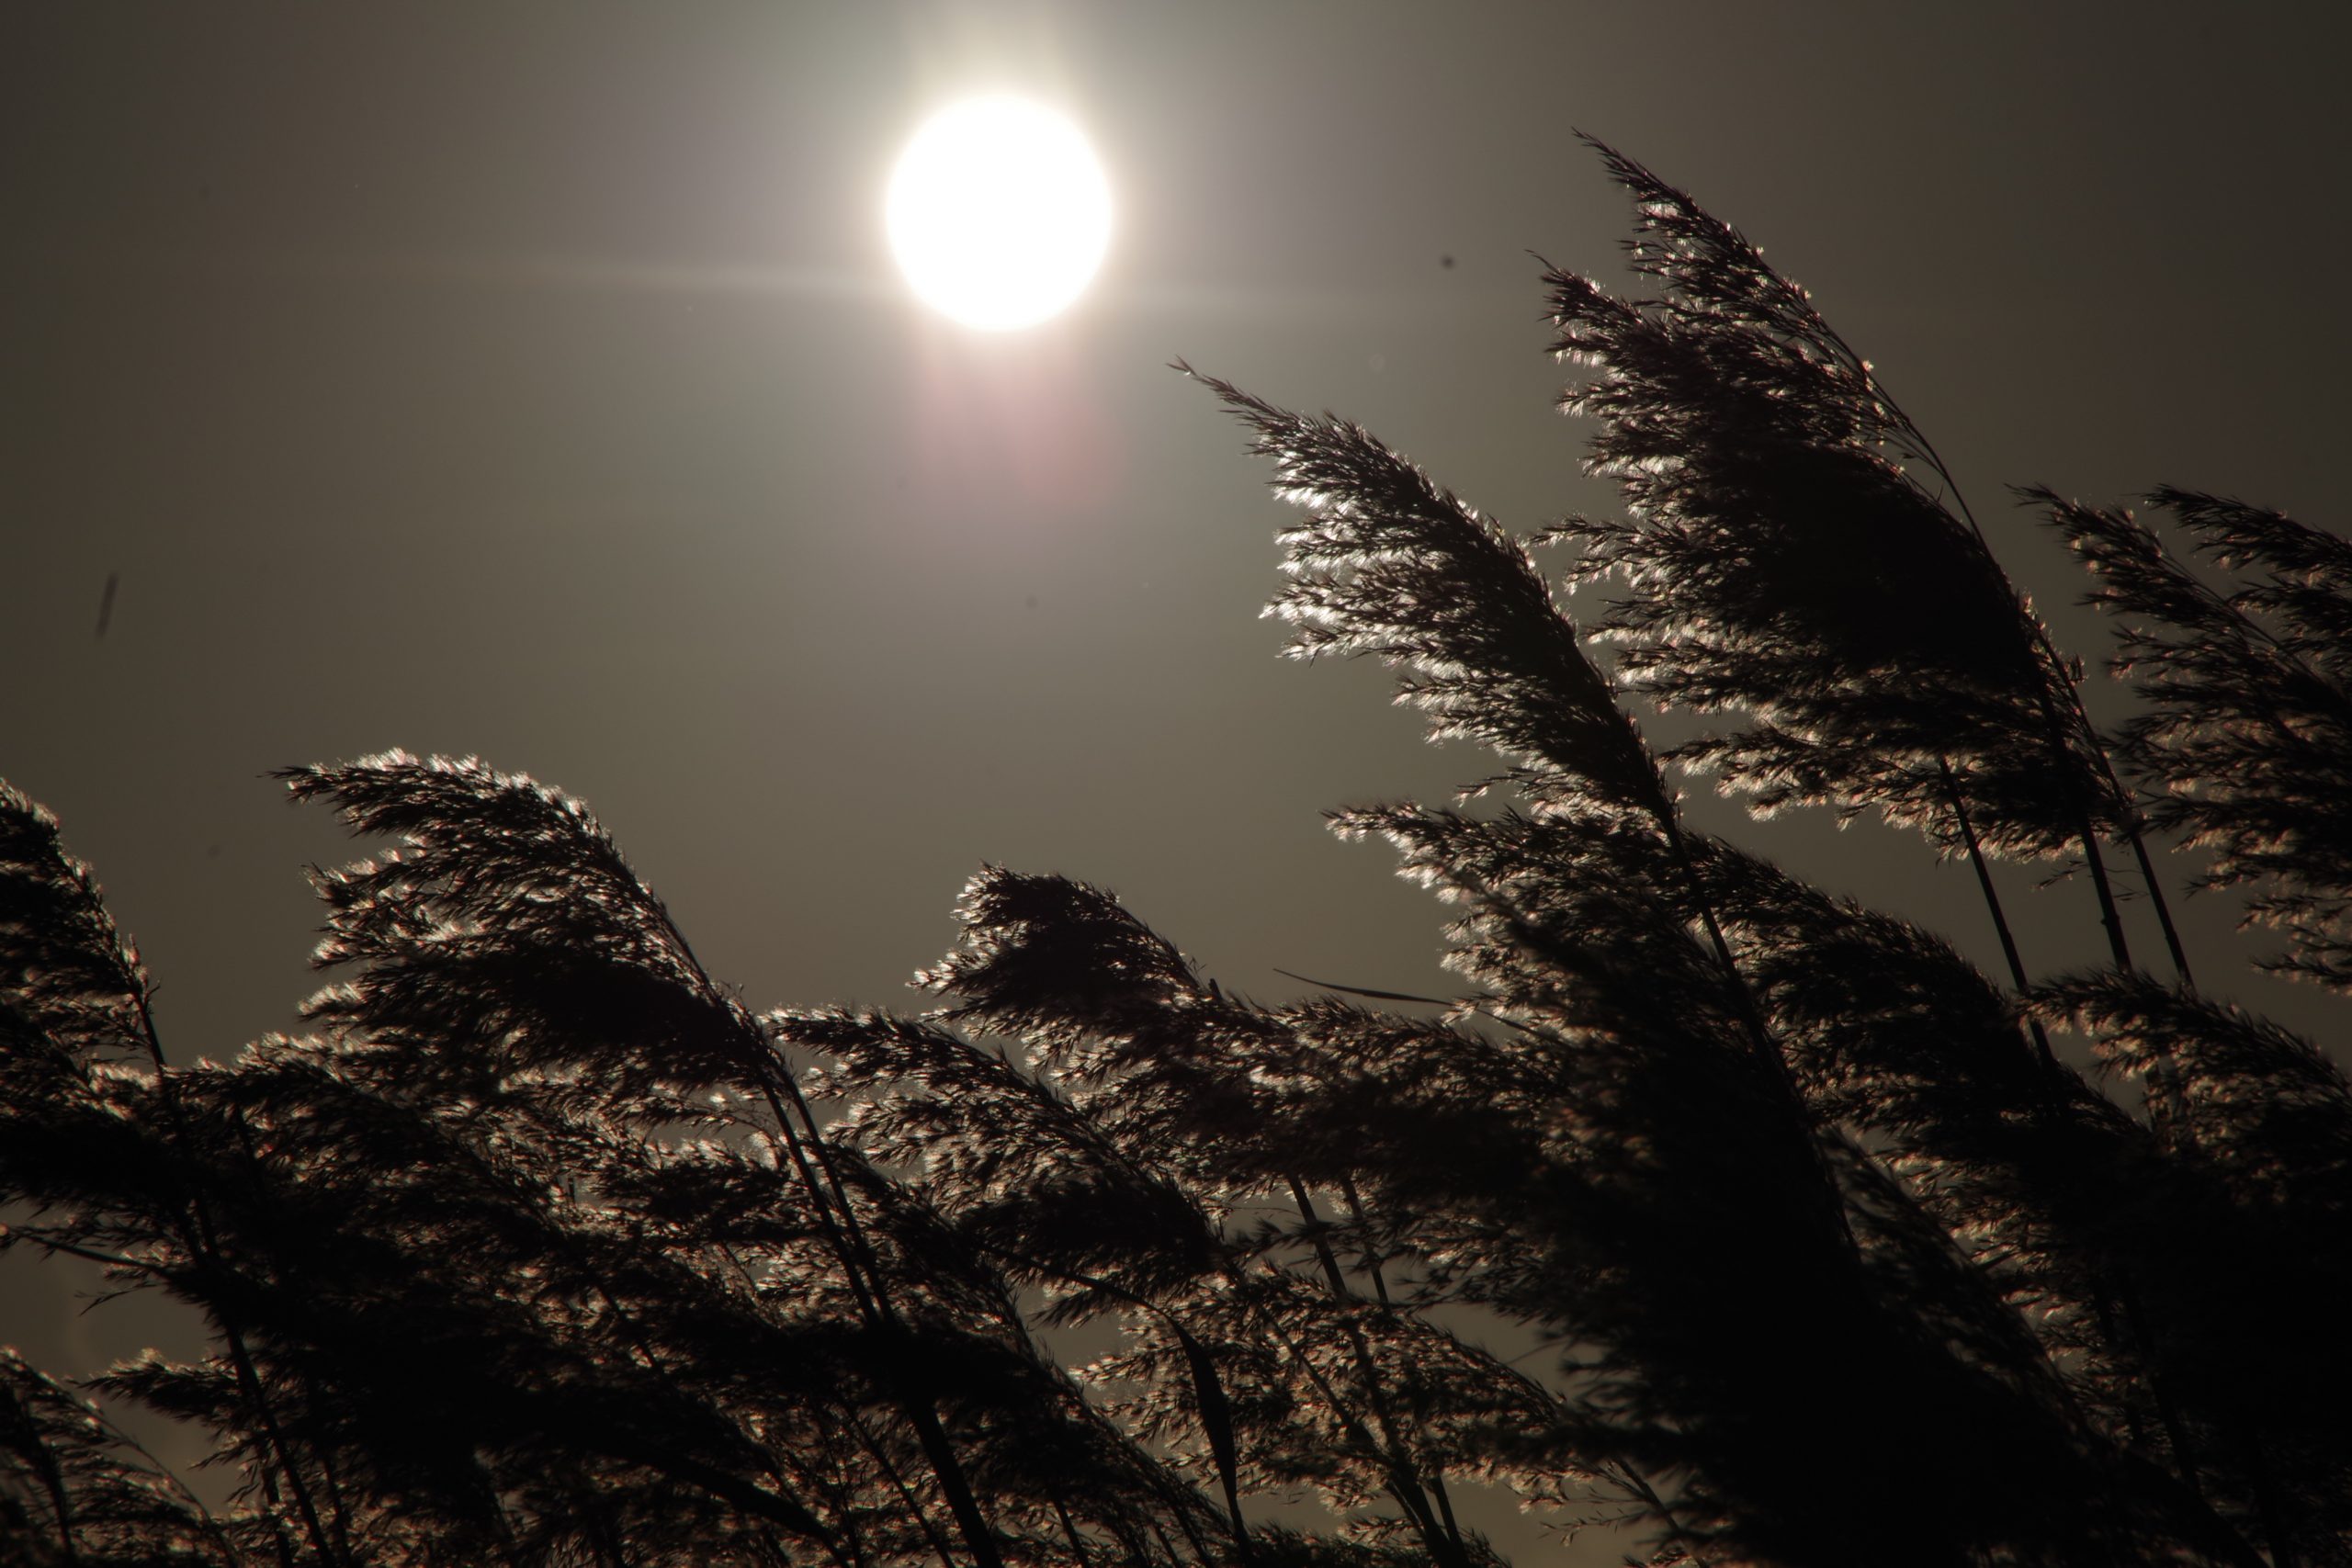 Silhouetted reeds